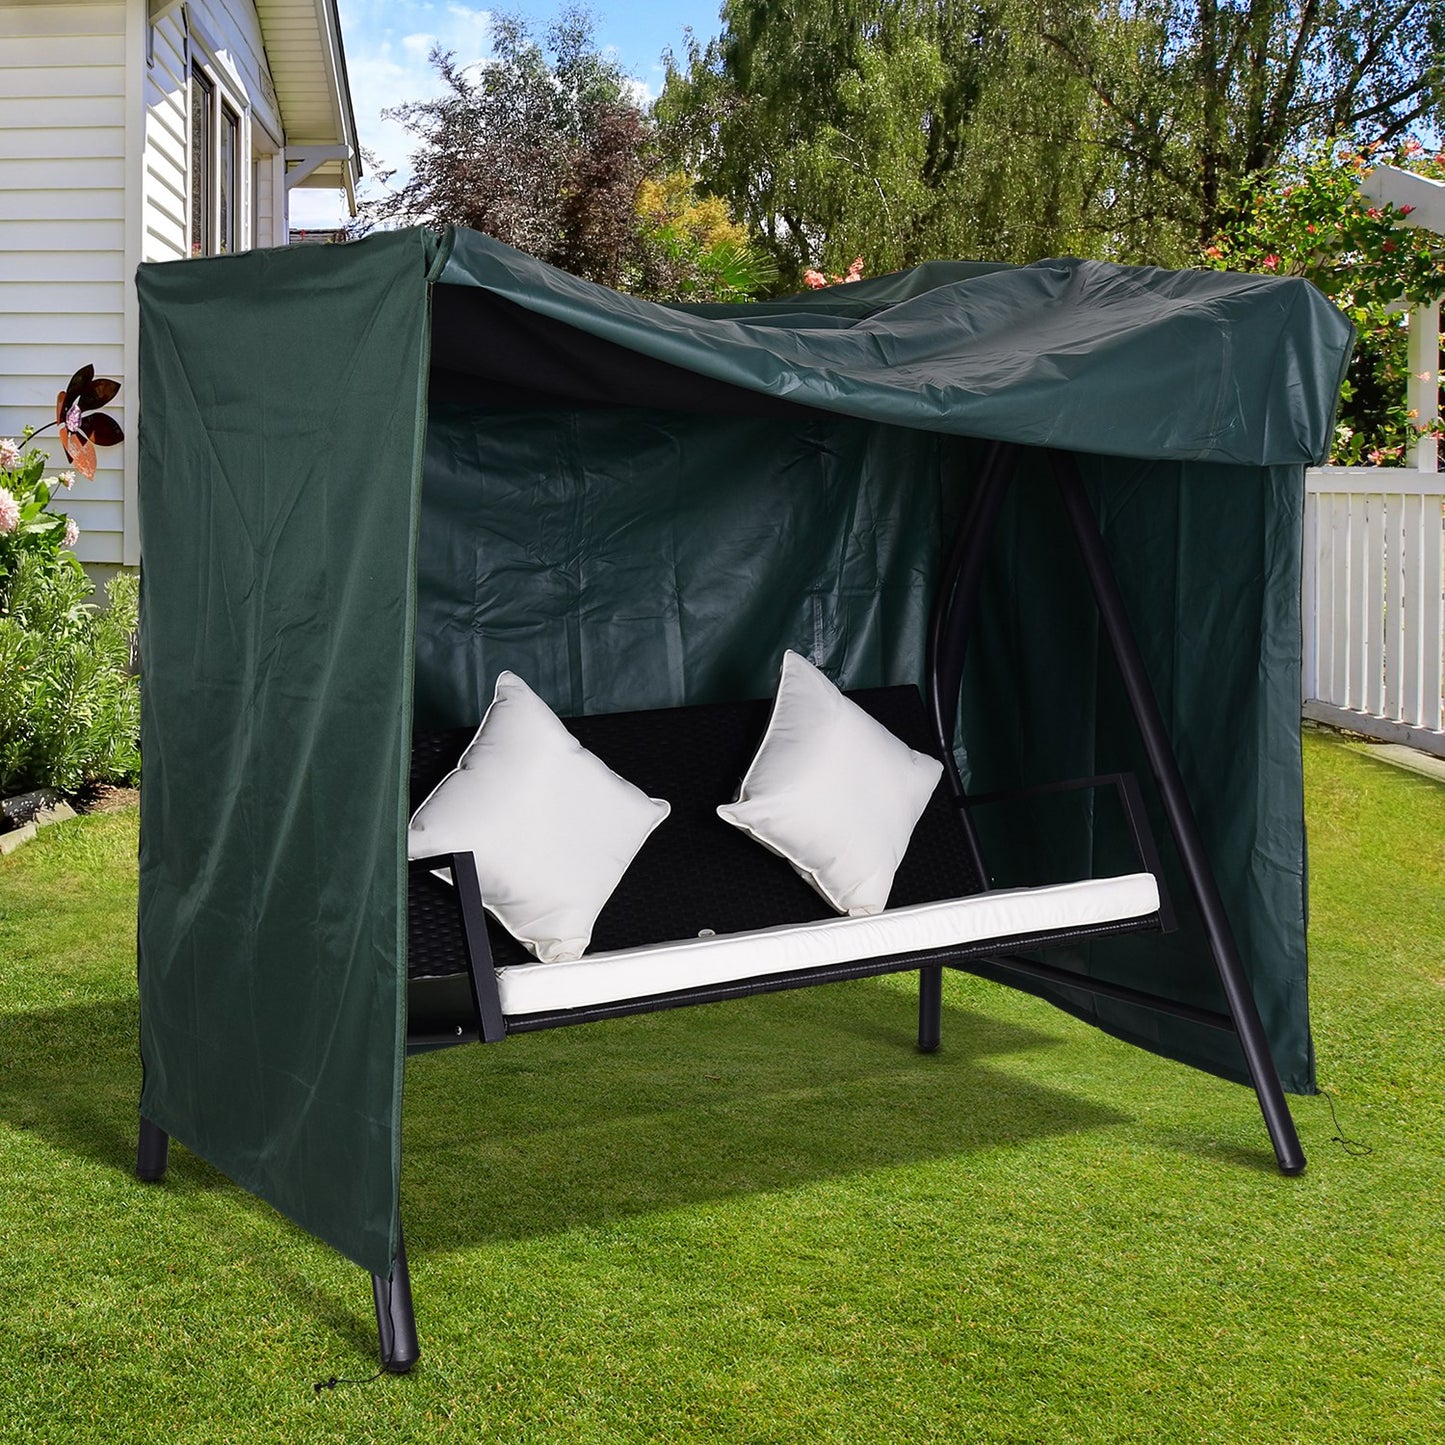 Outsunny Swing Chair Cover: 600D Oxford Polyester, Waterproof, Durable, Green